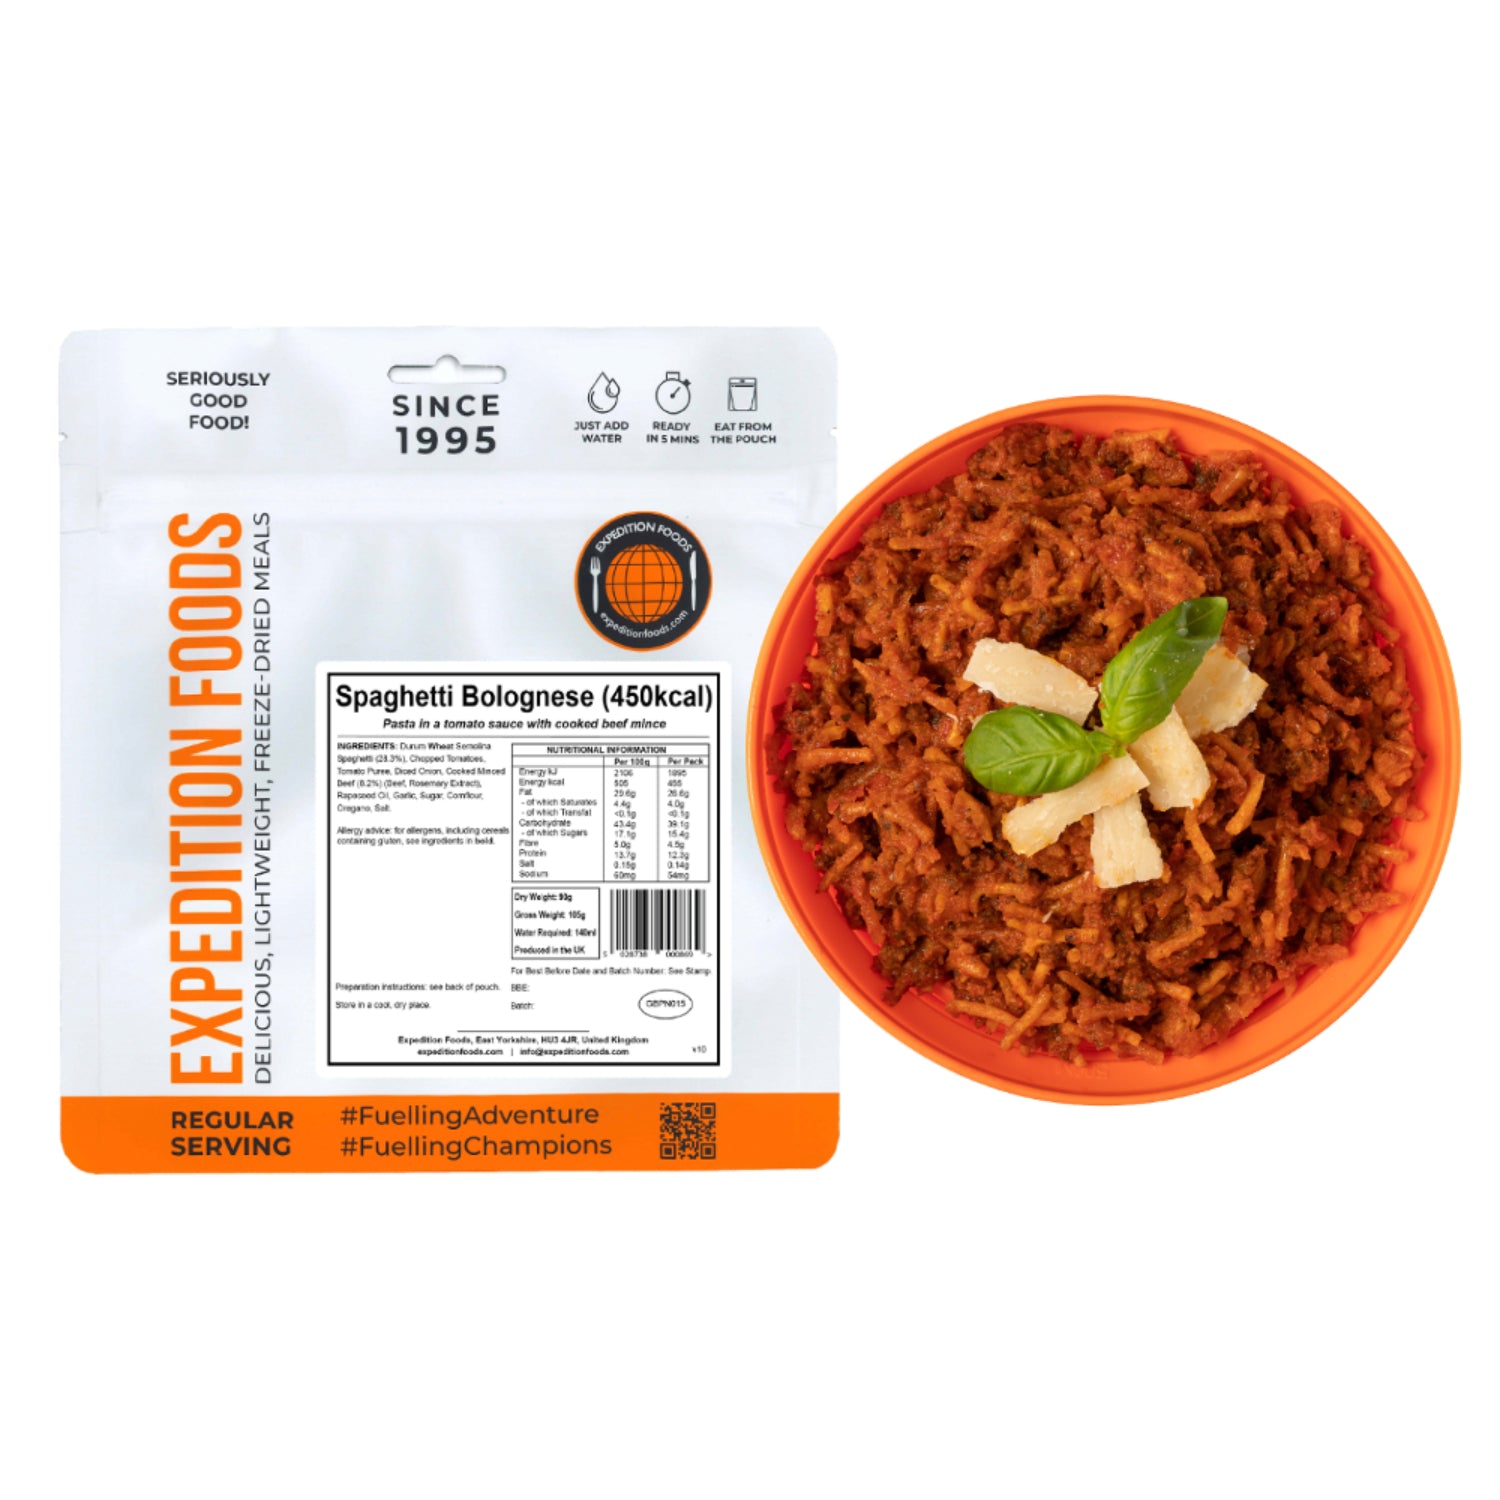 Expedition Foods Spaghetti Bolognese (450kcal)